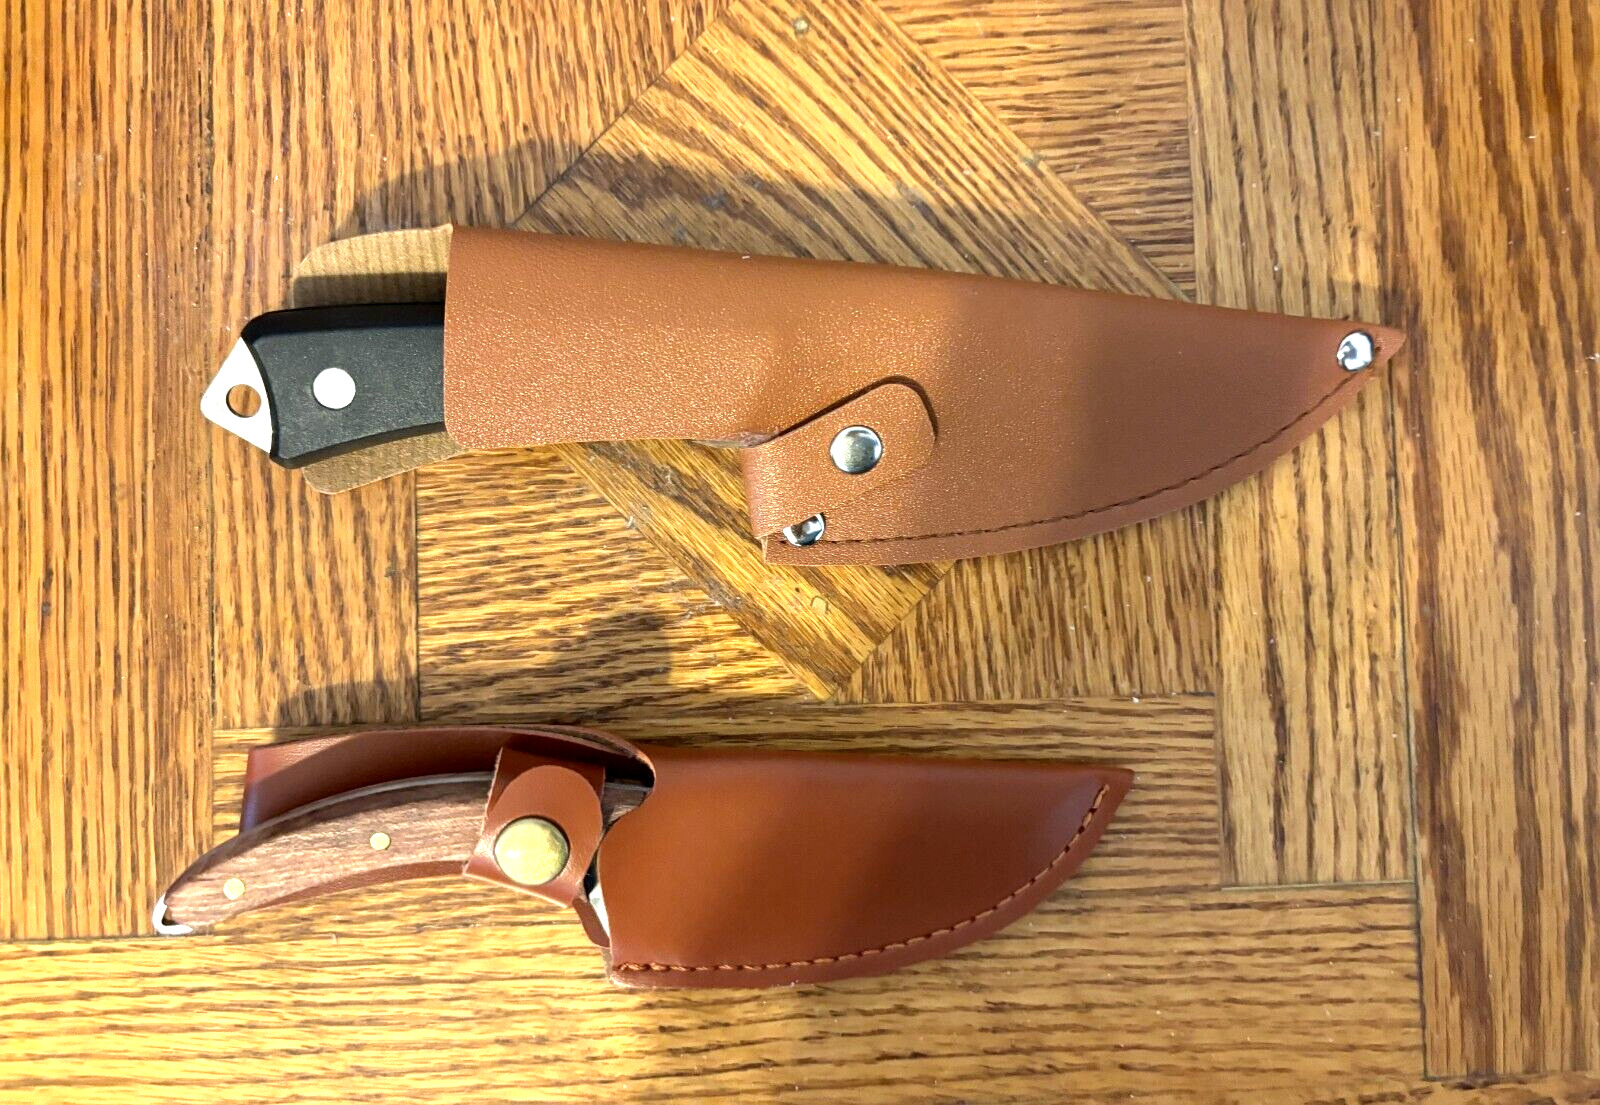 TWO NICE SMALL - STAINLESS STEEL KNIFES-FINISHED WOOD & BAKELITE HANDLES  #K3